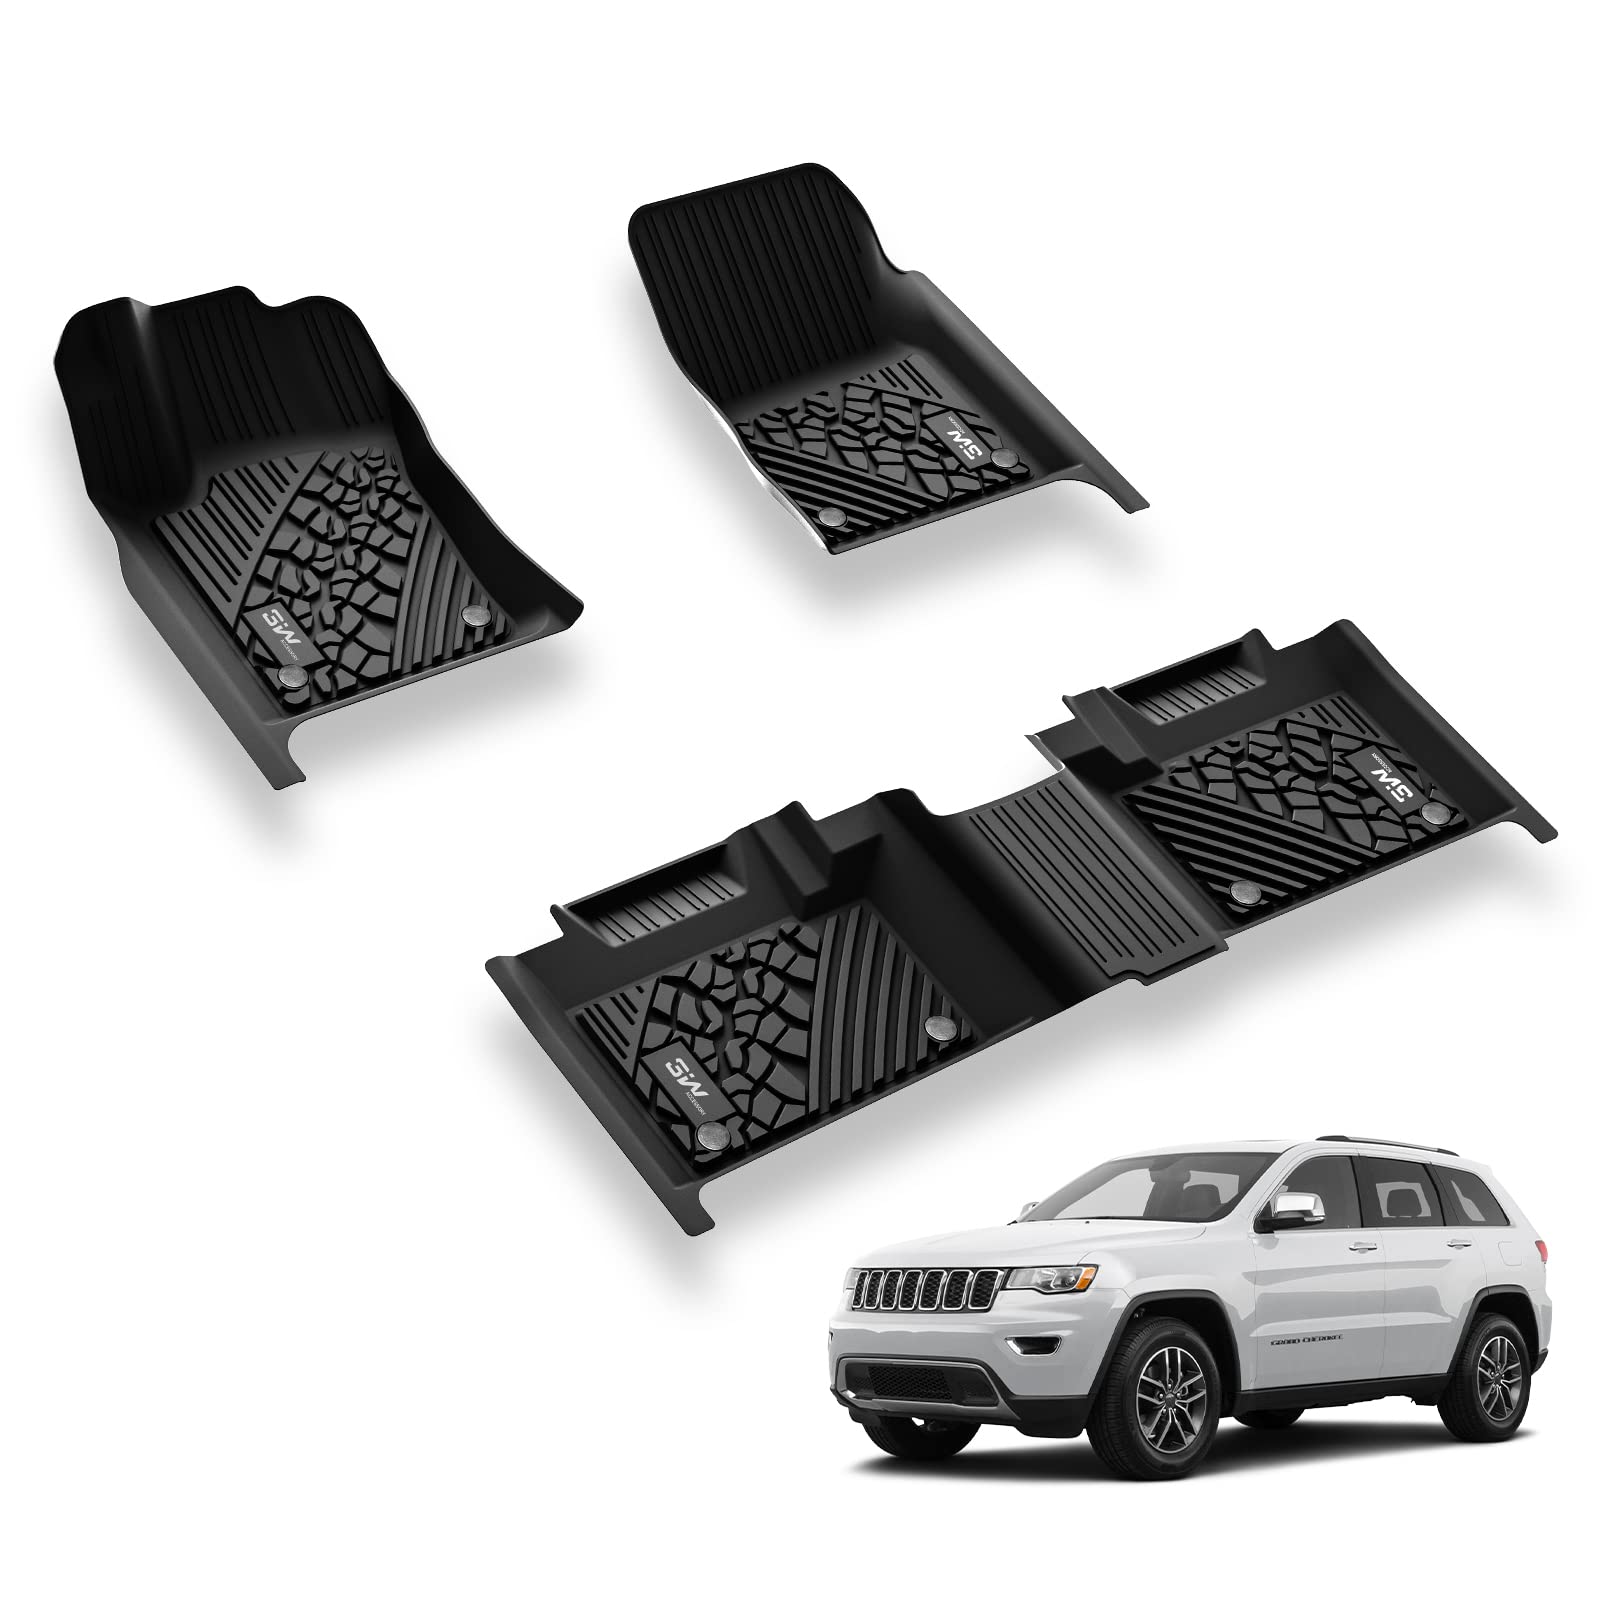 3W Jeep Grand Cherokee 2013-2015 (Non L or WK) Custom Floor Mat Trunk Mat TPE Material & All-Weather Protection Vehicles & Parts 3W 2013-2015 Grand Cherokee 2013-2015 1st&2nd Row Mats